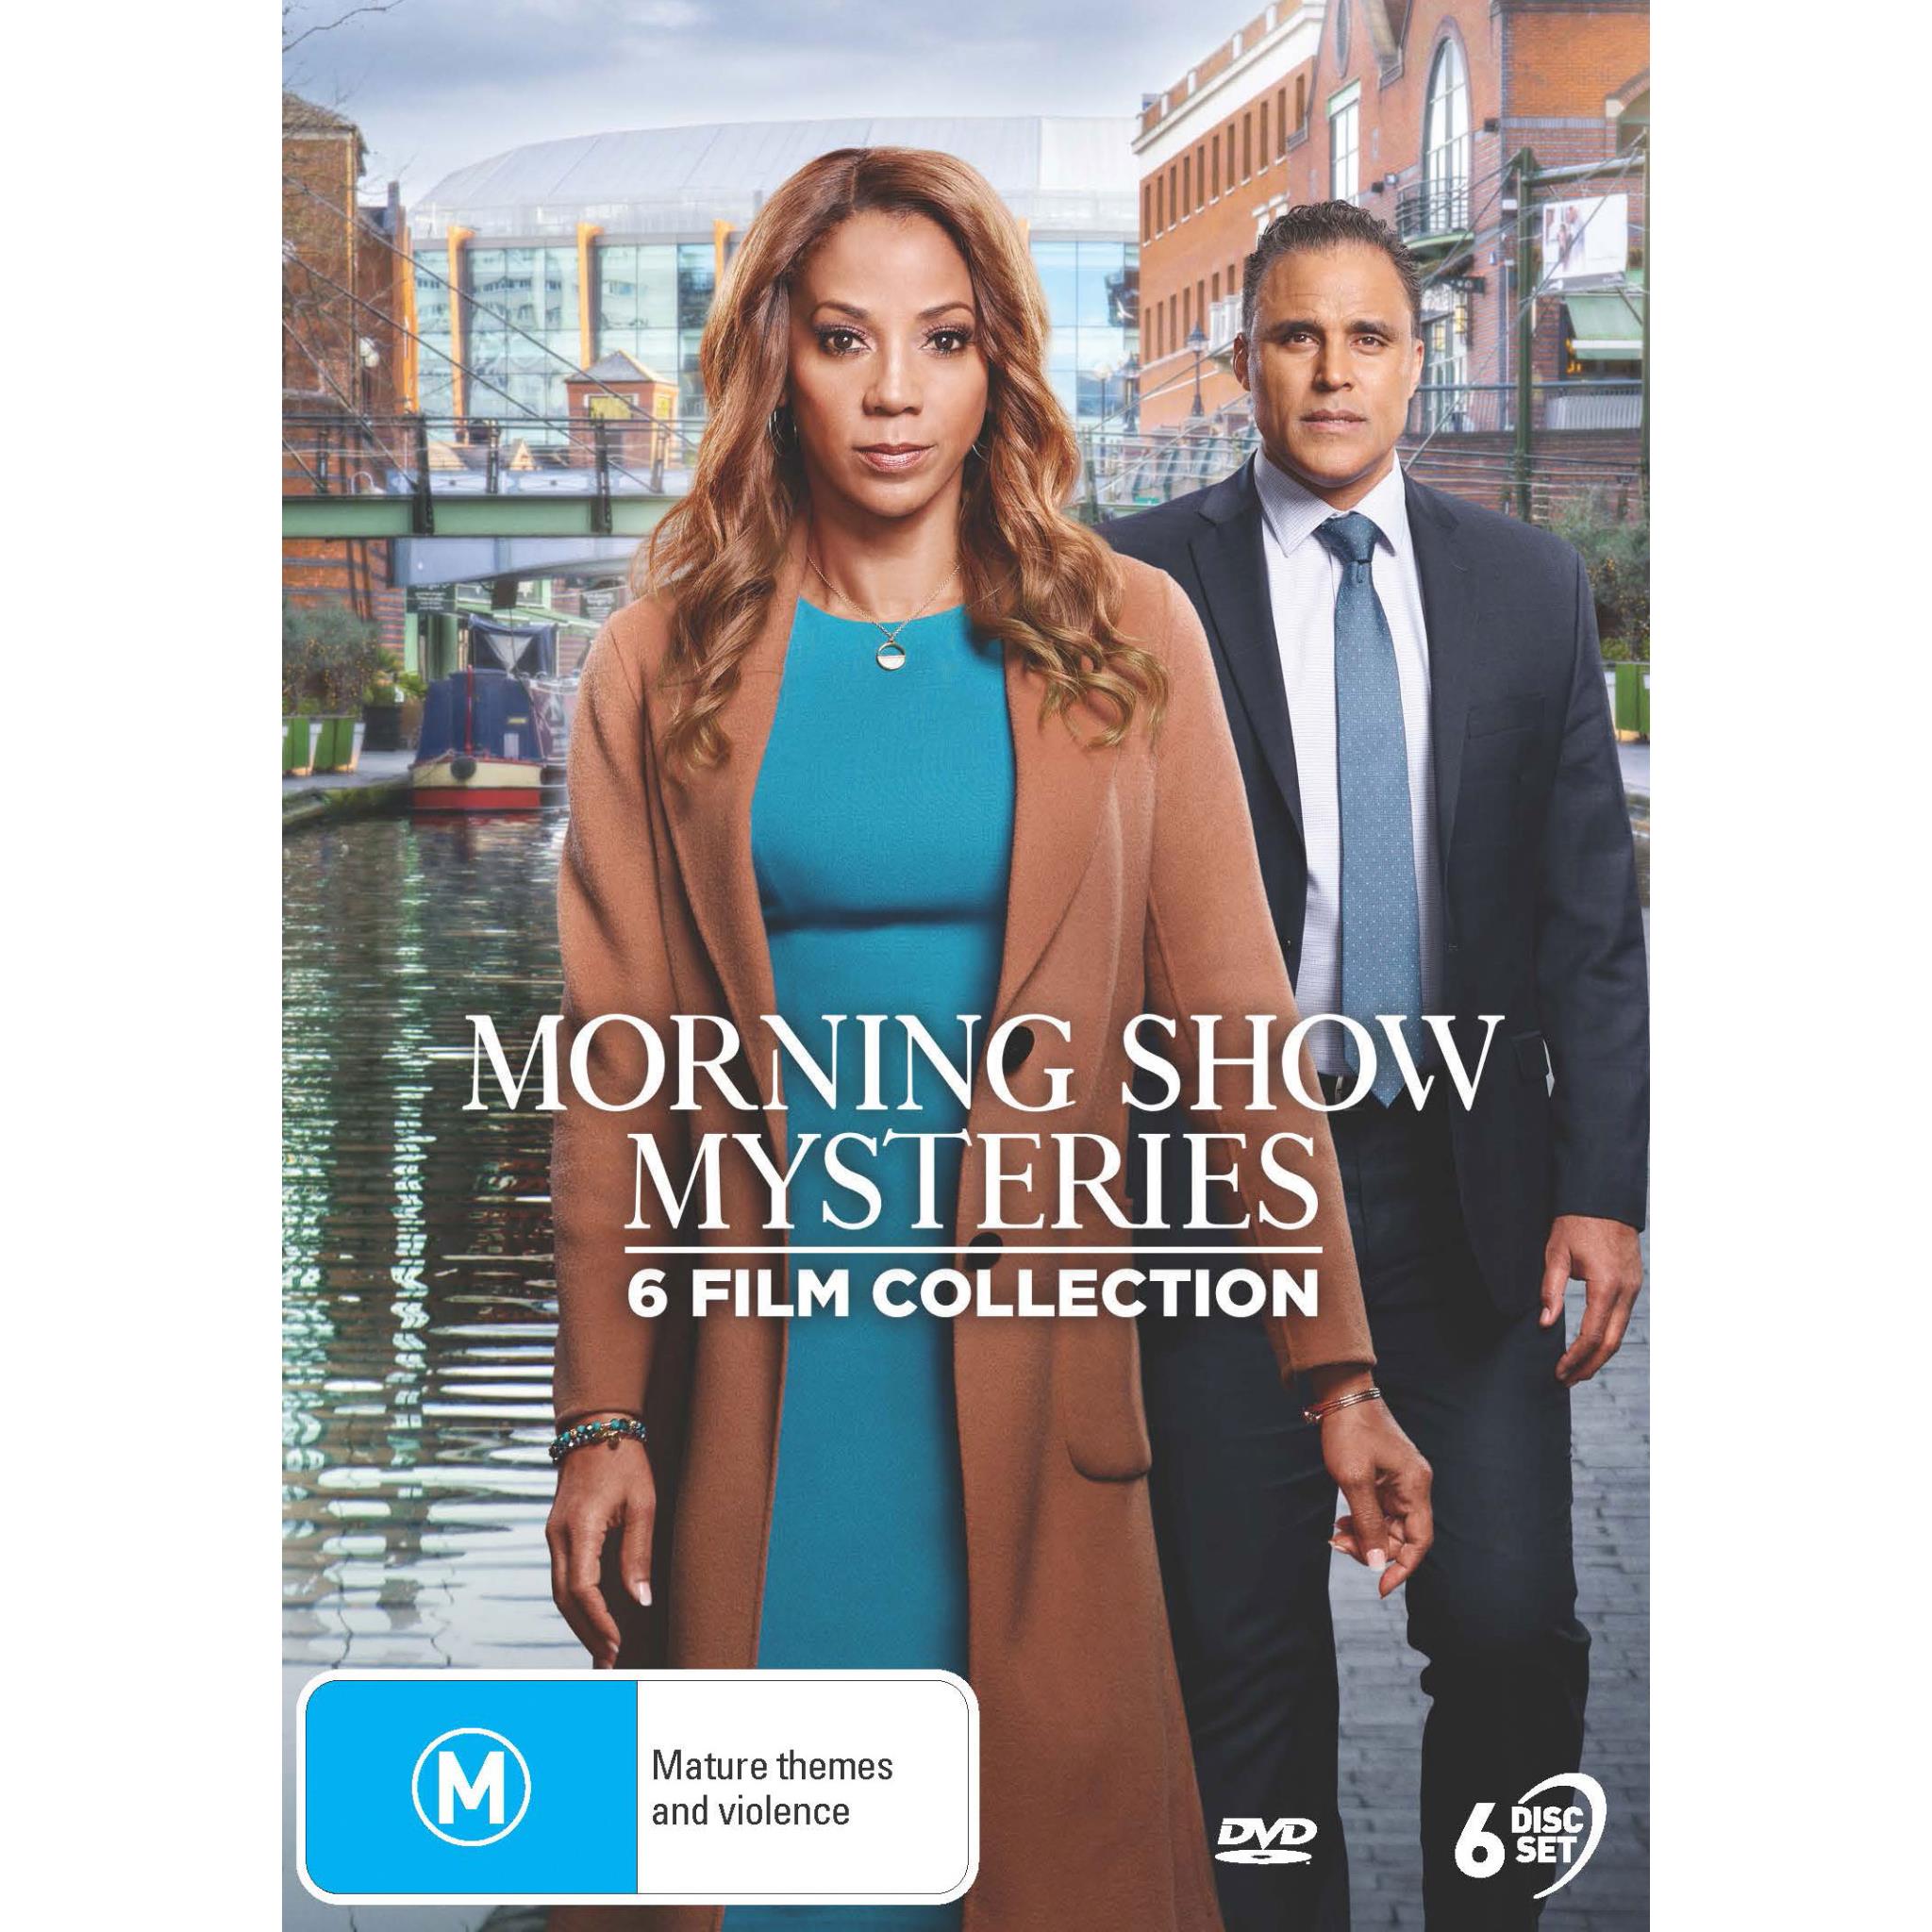 Morning Show Mysteries Collection - JB Hi-Fi